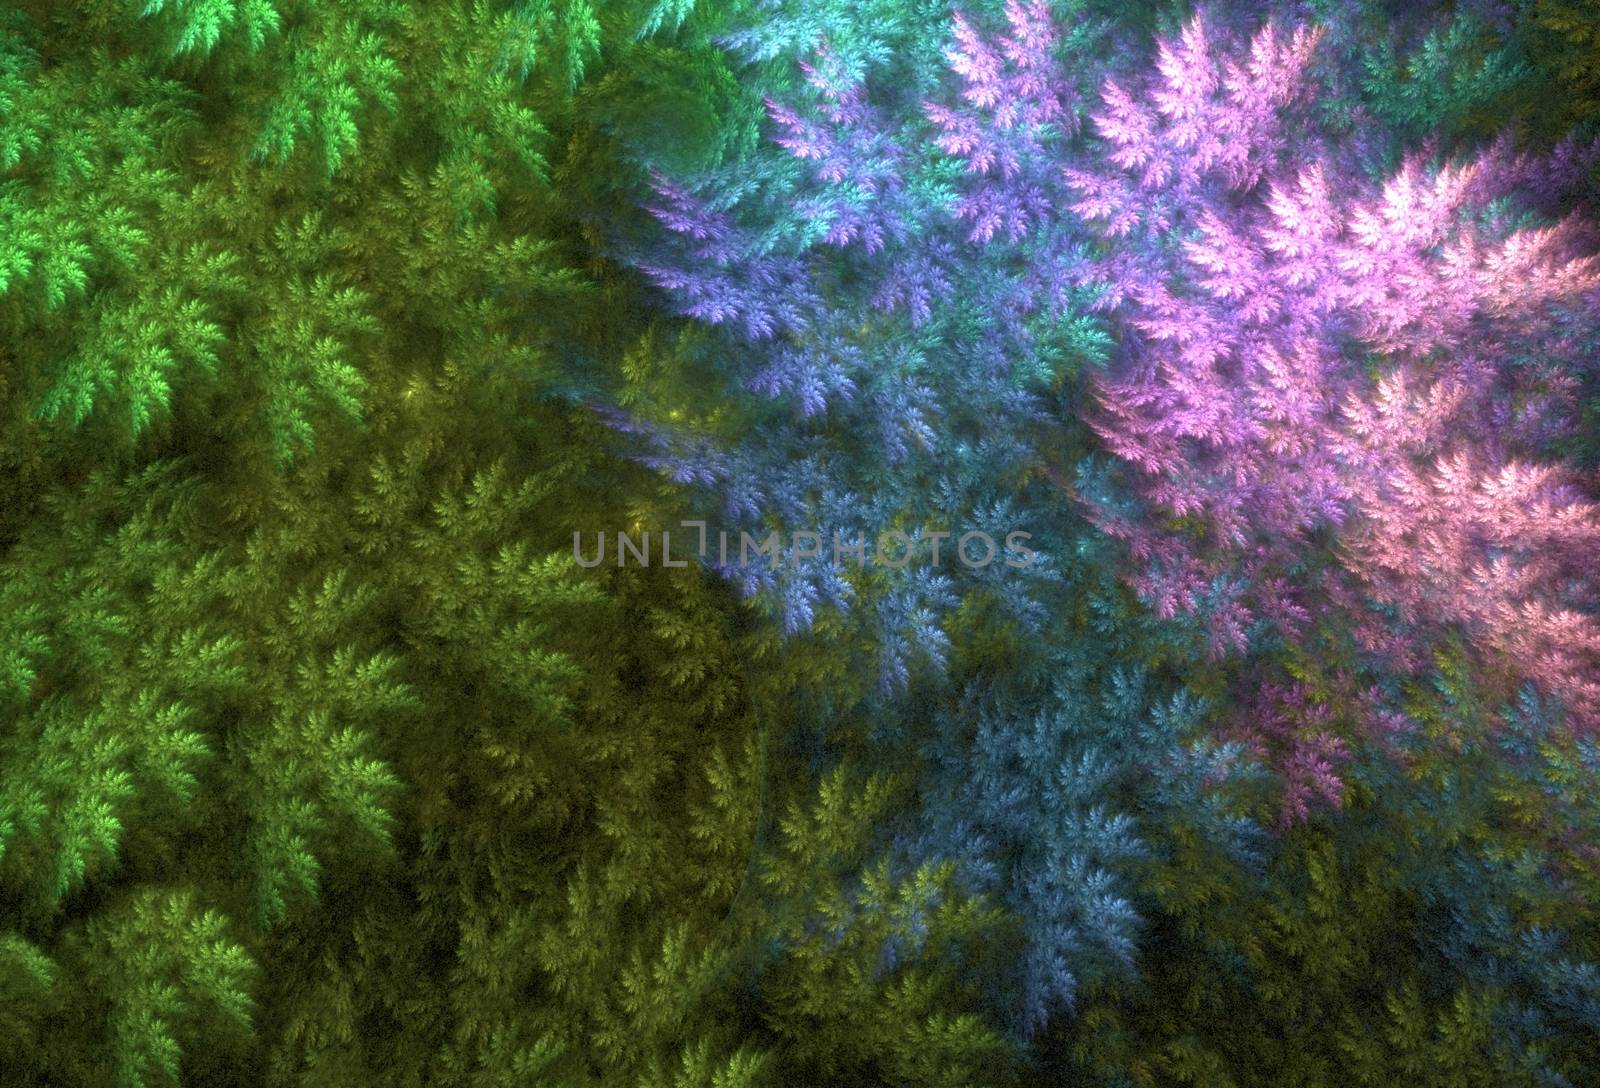 Digital Art: Fractal Graphics: The Mysterious Pine Forest. Fantastic Wallpaper / Background / Scene Design. Sci-Fi / Abstract Style. by NextMars